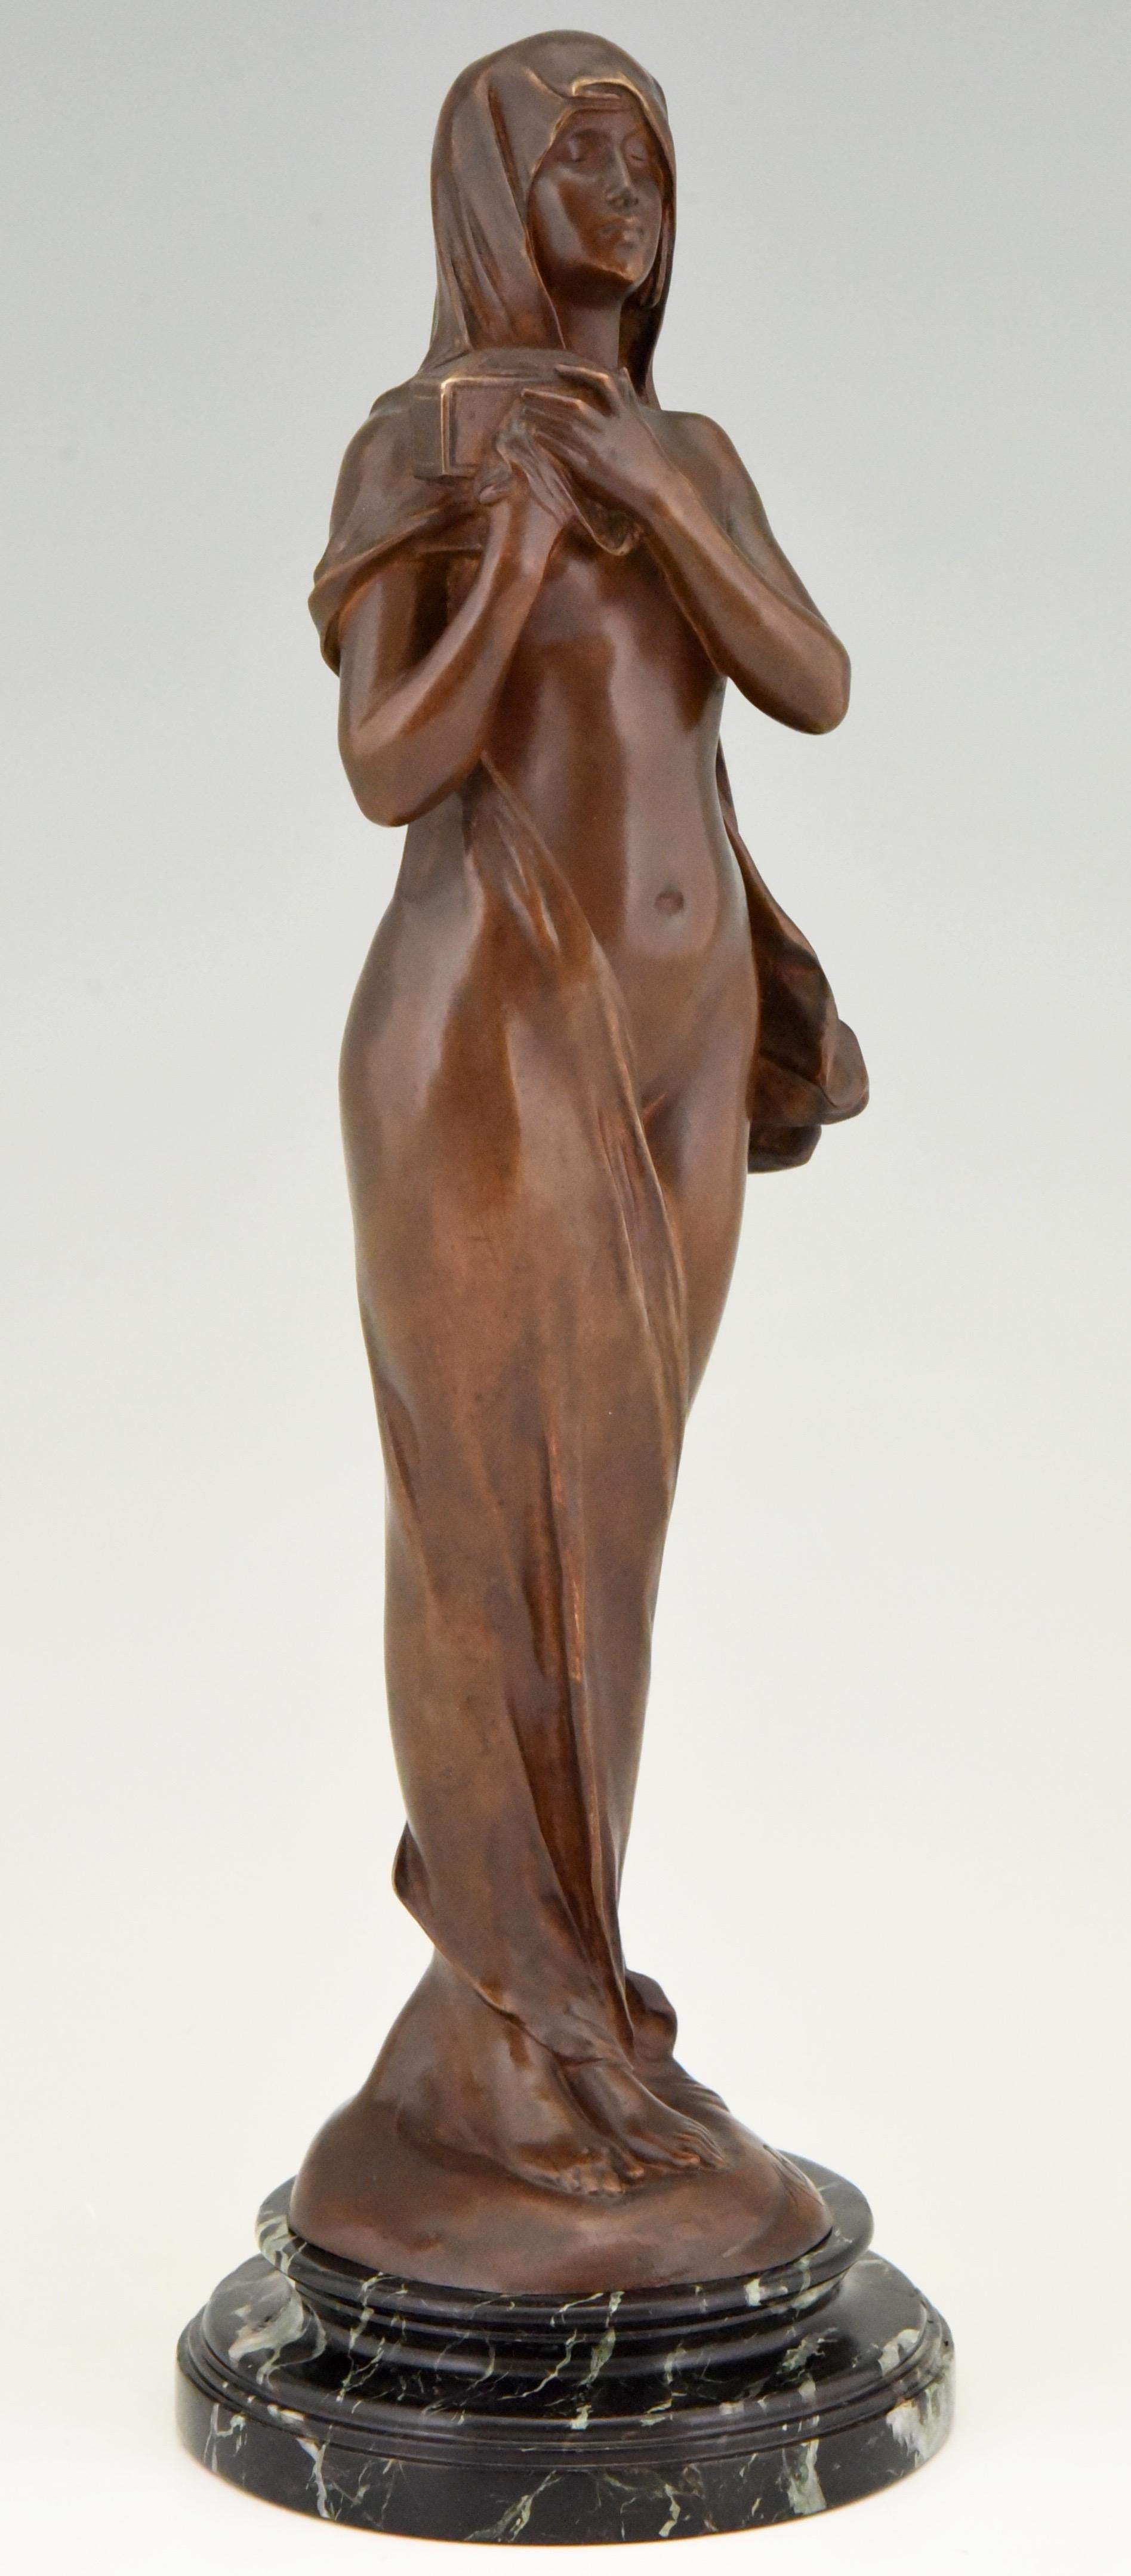 Le Secret, Art Nouveau bronze sculpture of a standing veiled nude holding a jewelry casket by the famous French sculptor Maurice Bouval who was born in Toulouse (1863- 1916)
The bronze has a lovely brown patina and stands on a circular dark green